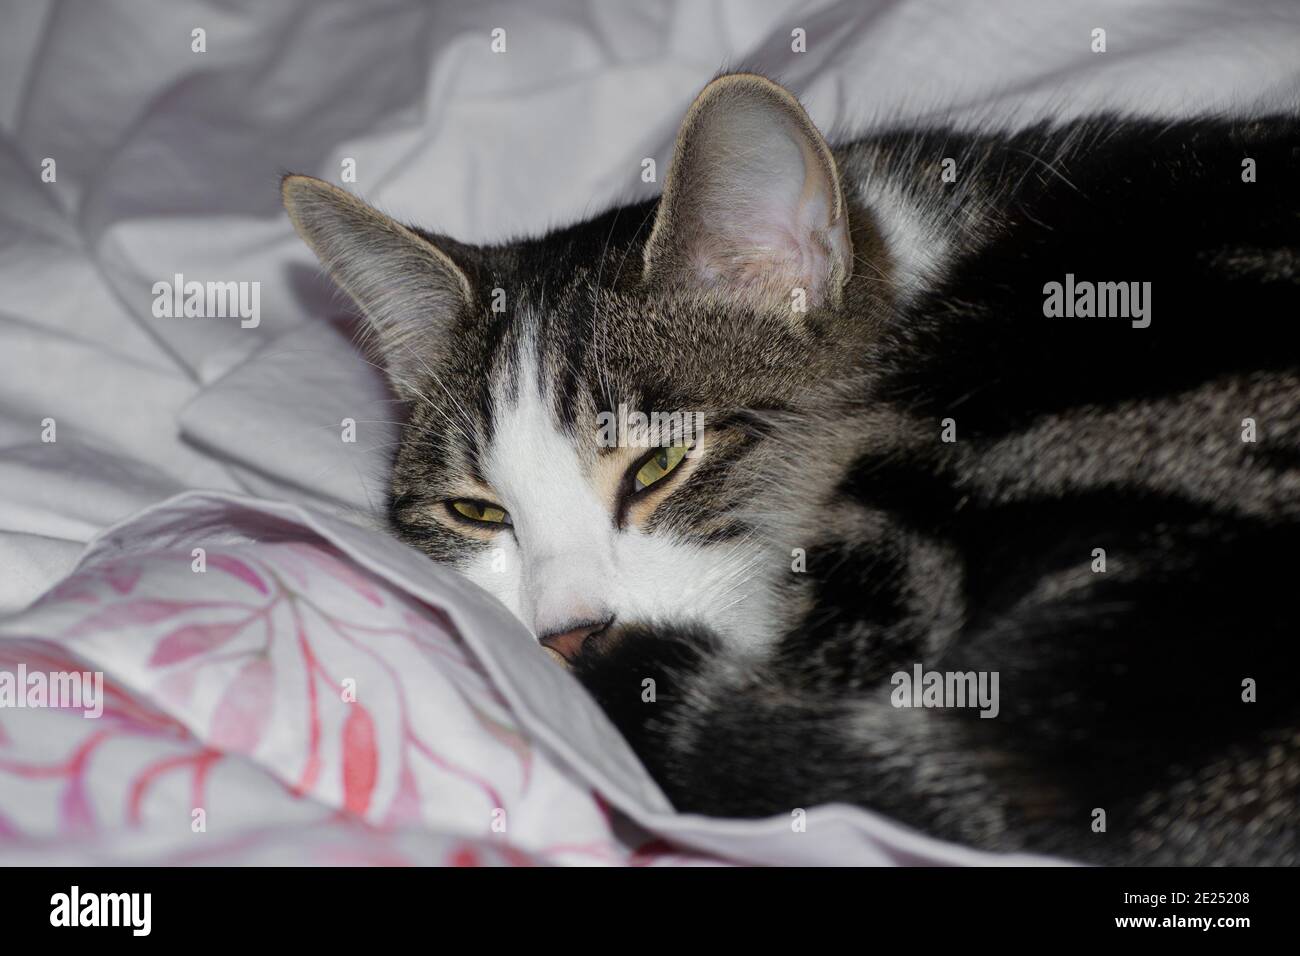 portrait of a tabby cat resting on a bed Stock Photo